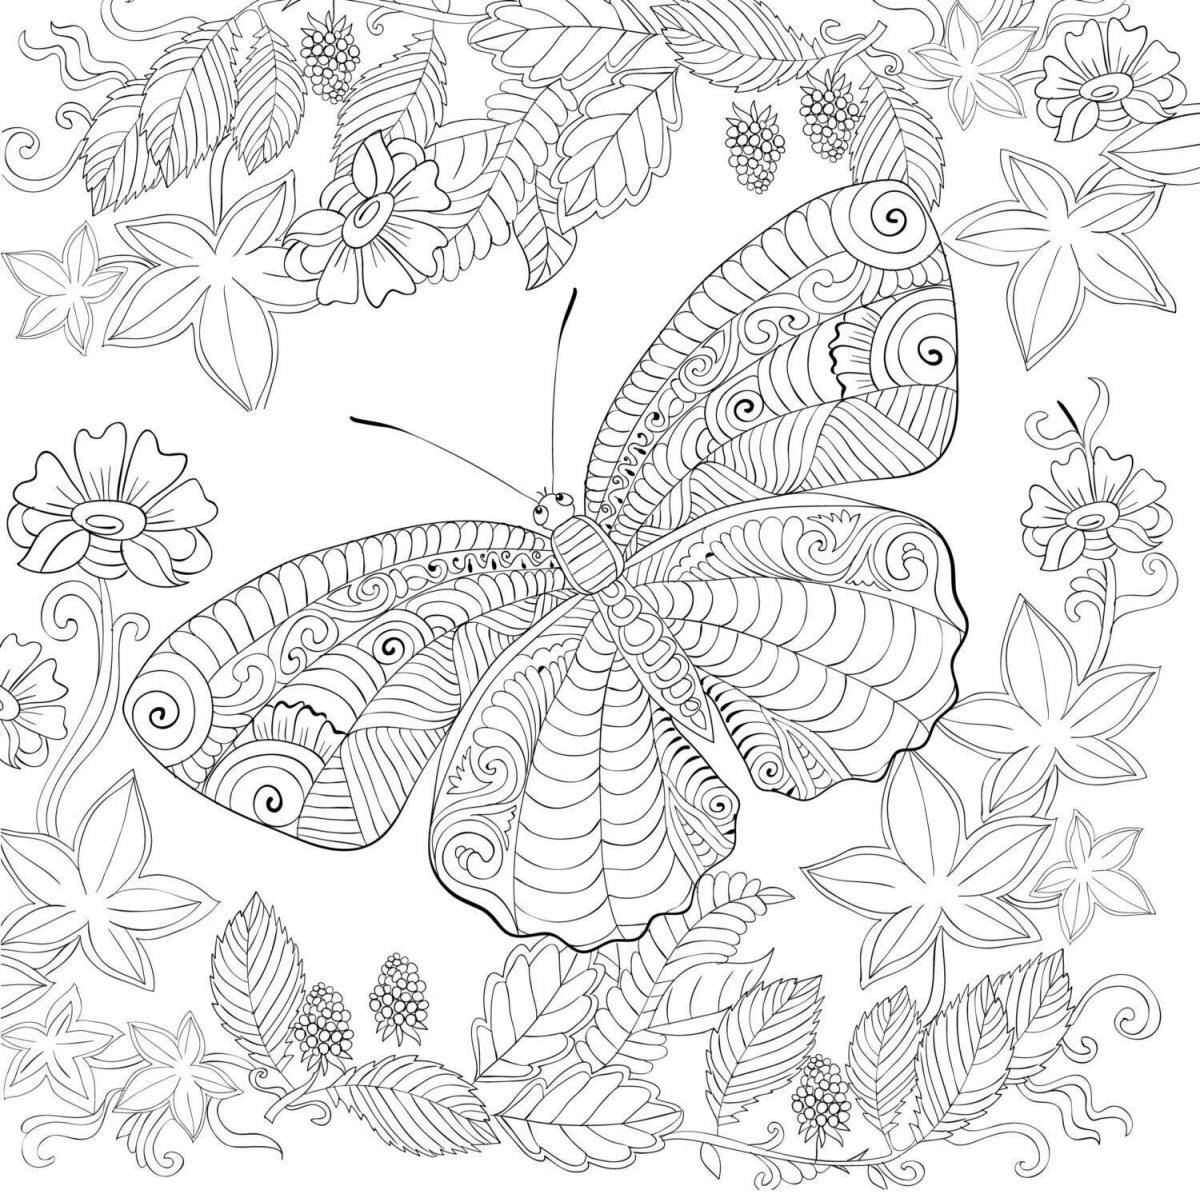 Encouraging coloring book for adults